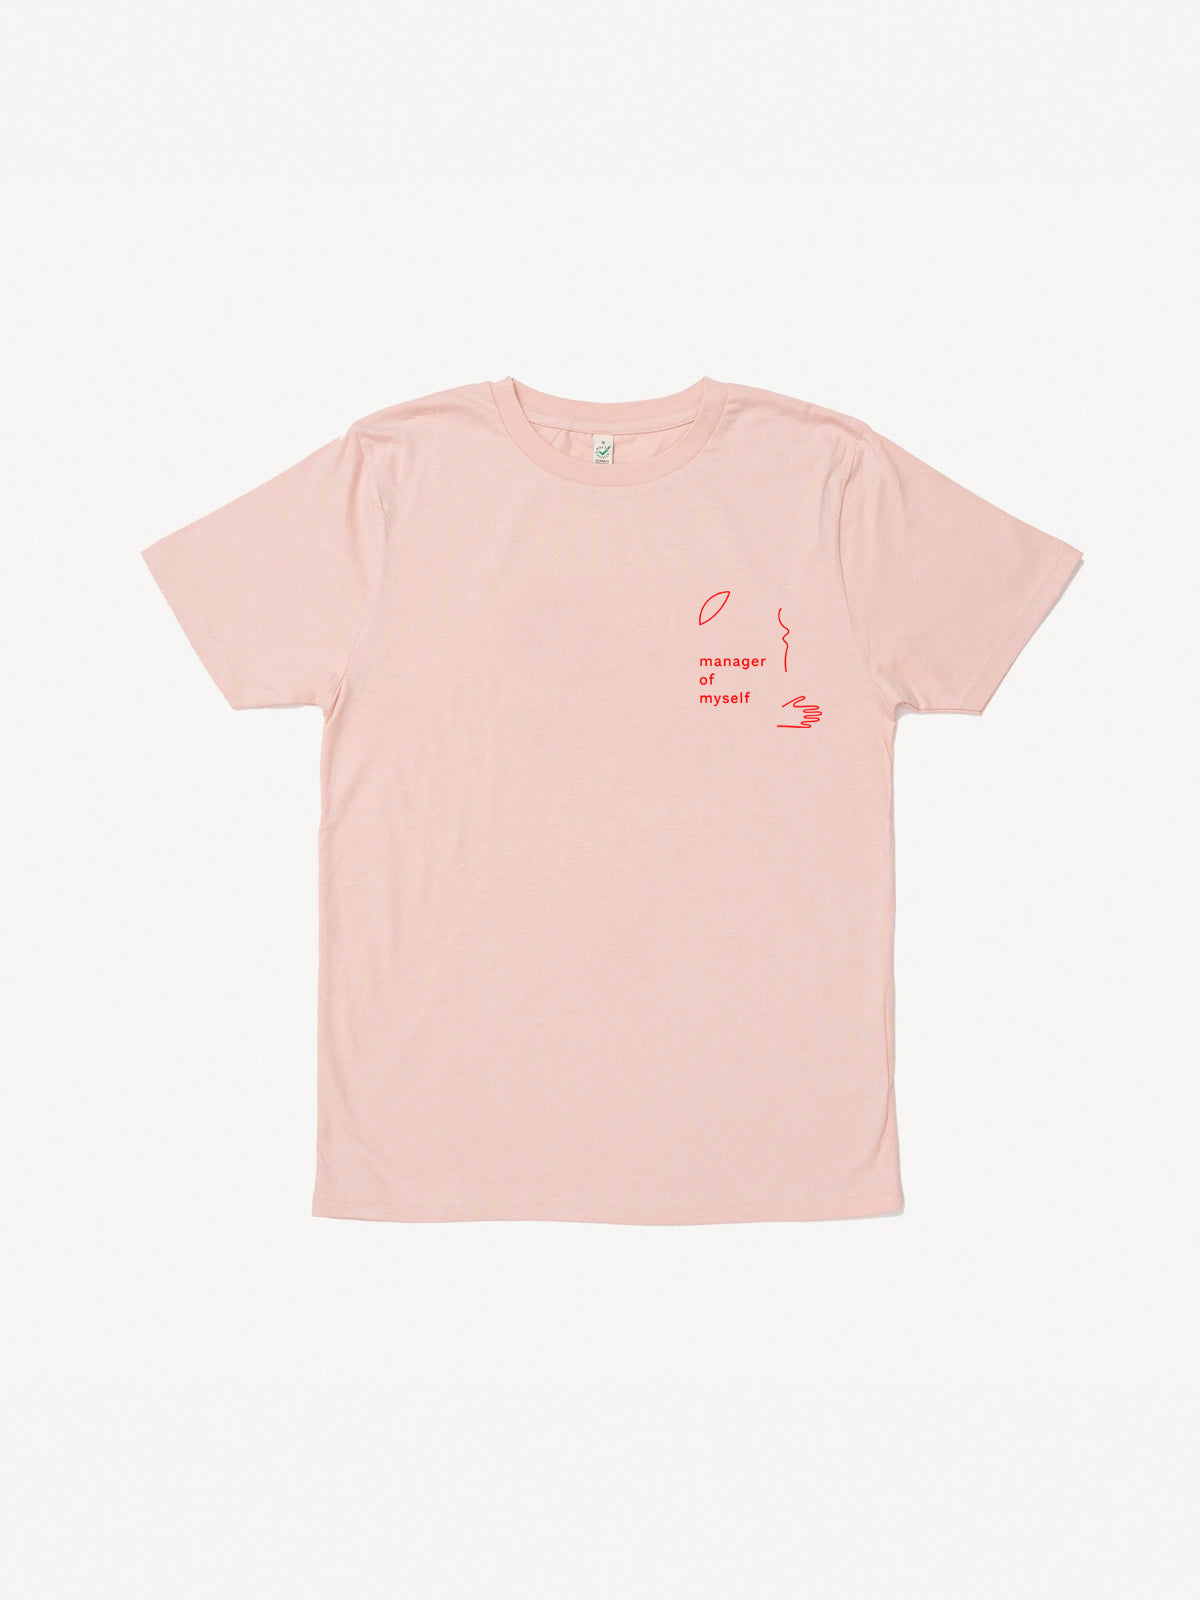 Manager of myself pink T-shirt